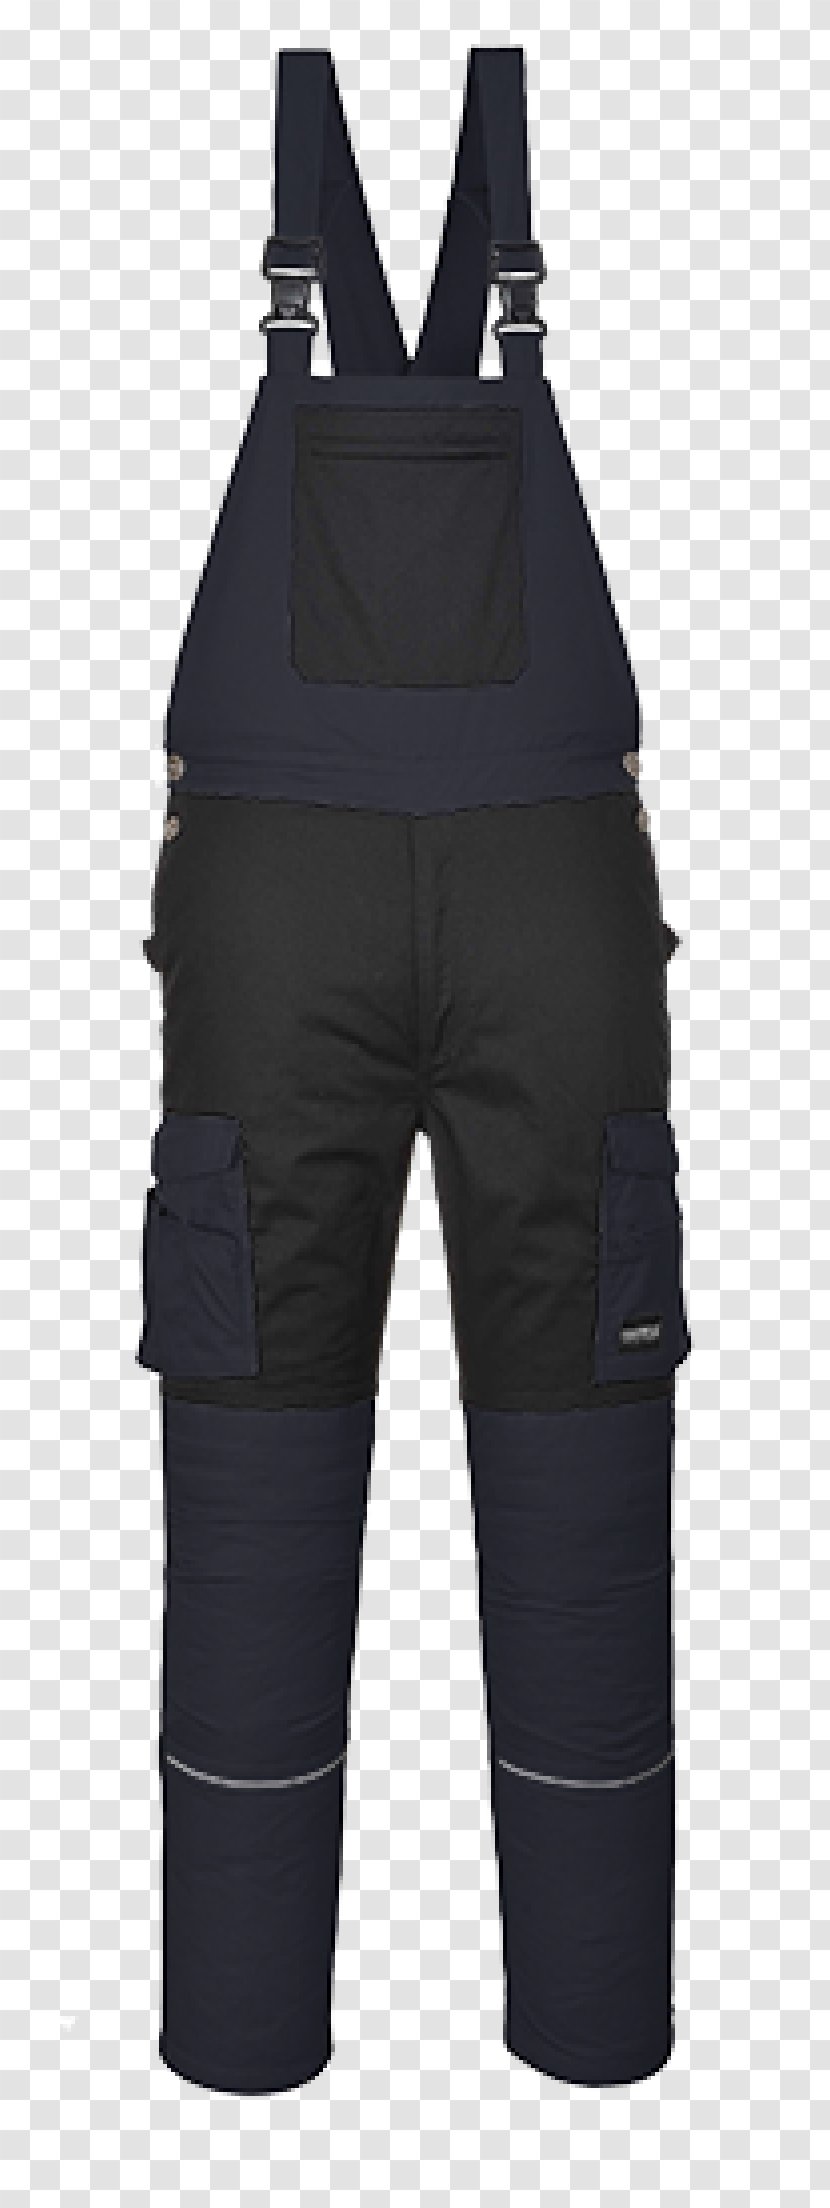 Overall Hockey Protective Pants & Ski Shorts Portwest Braces - Granite - Best Bib And Tucker Transparent PNG